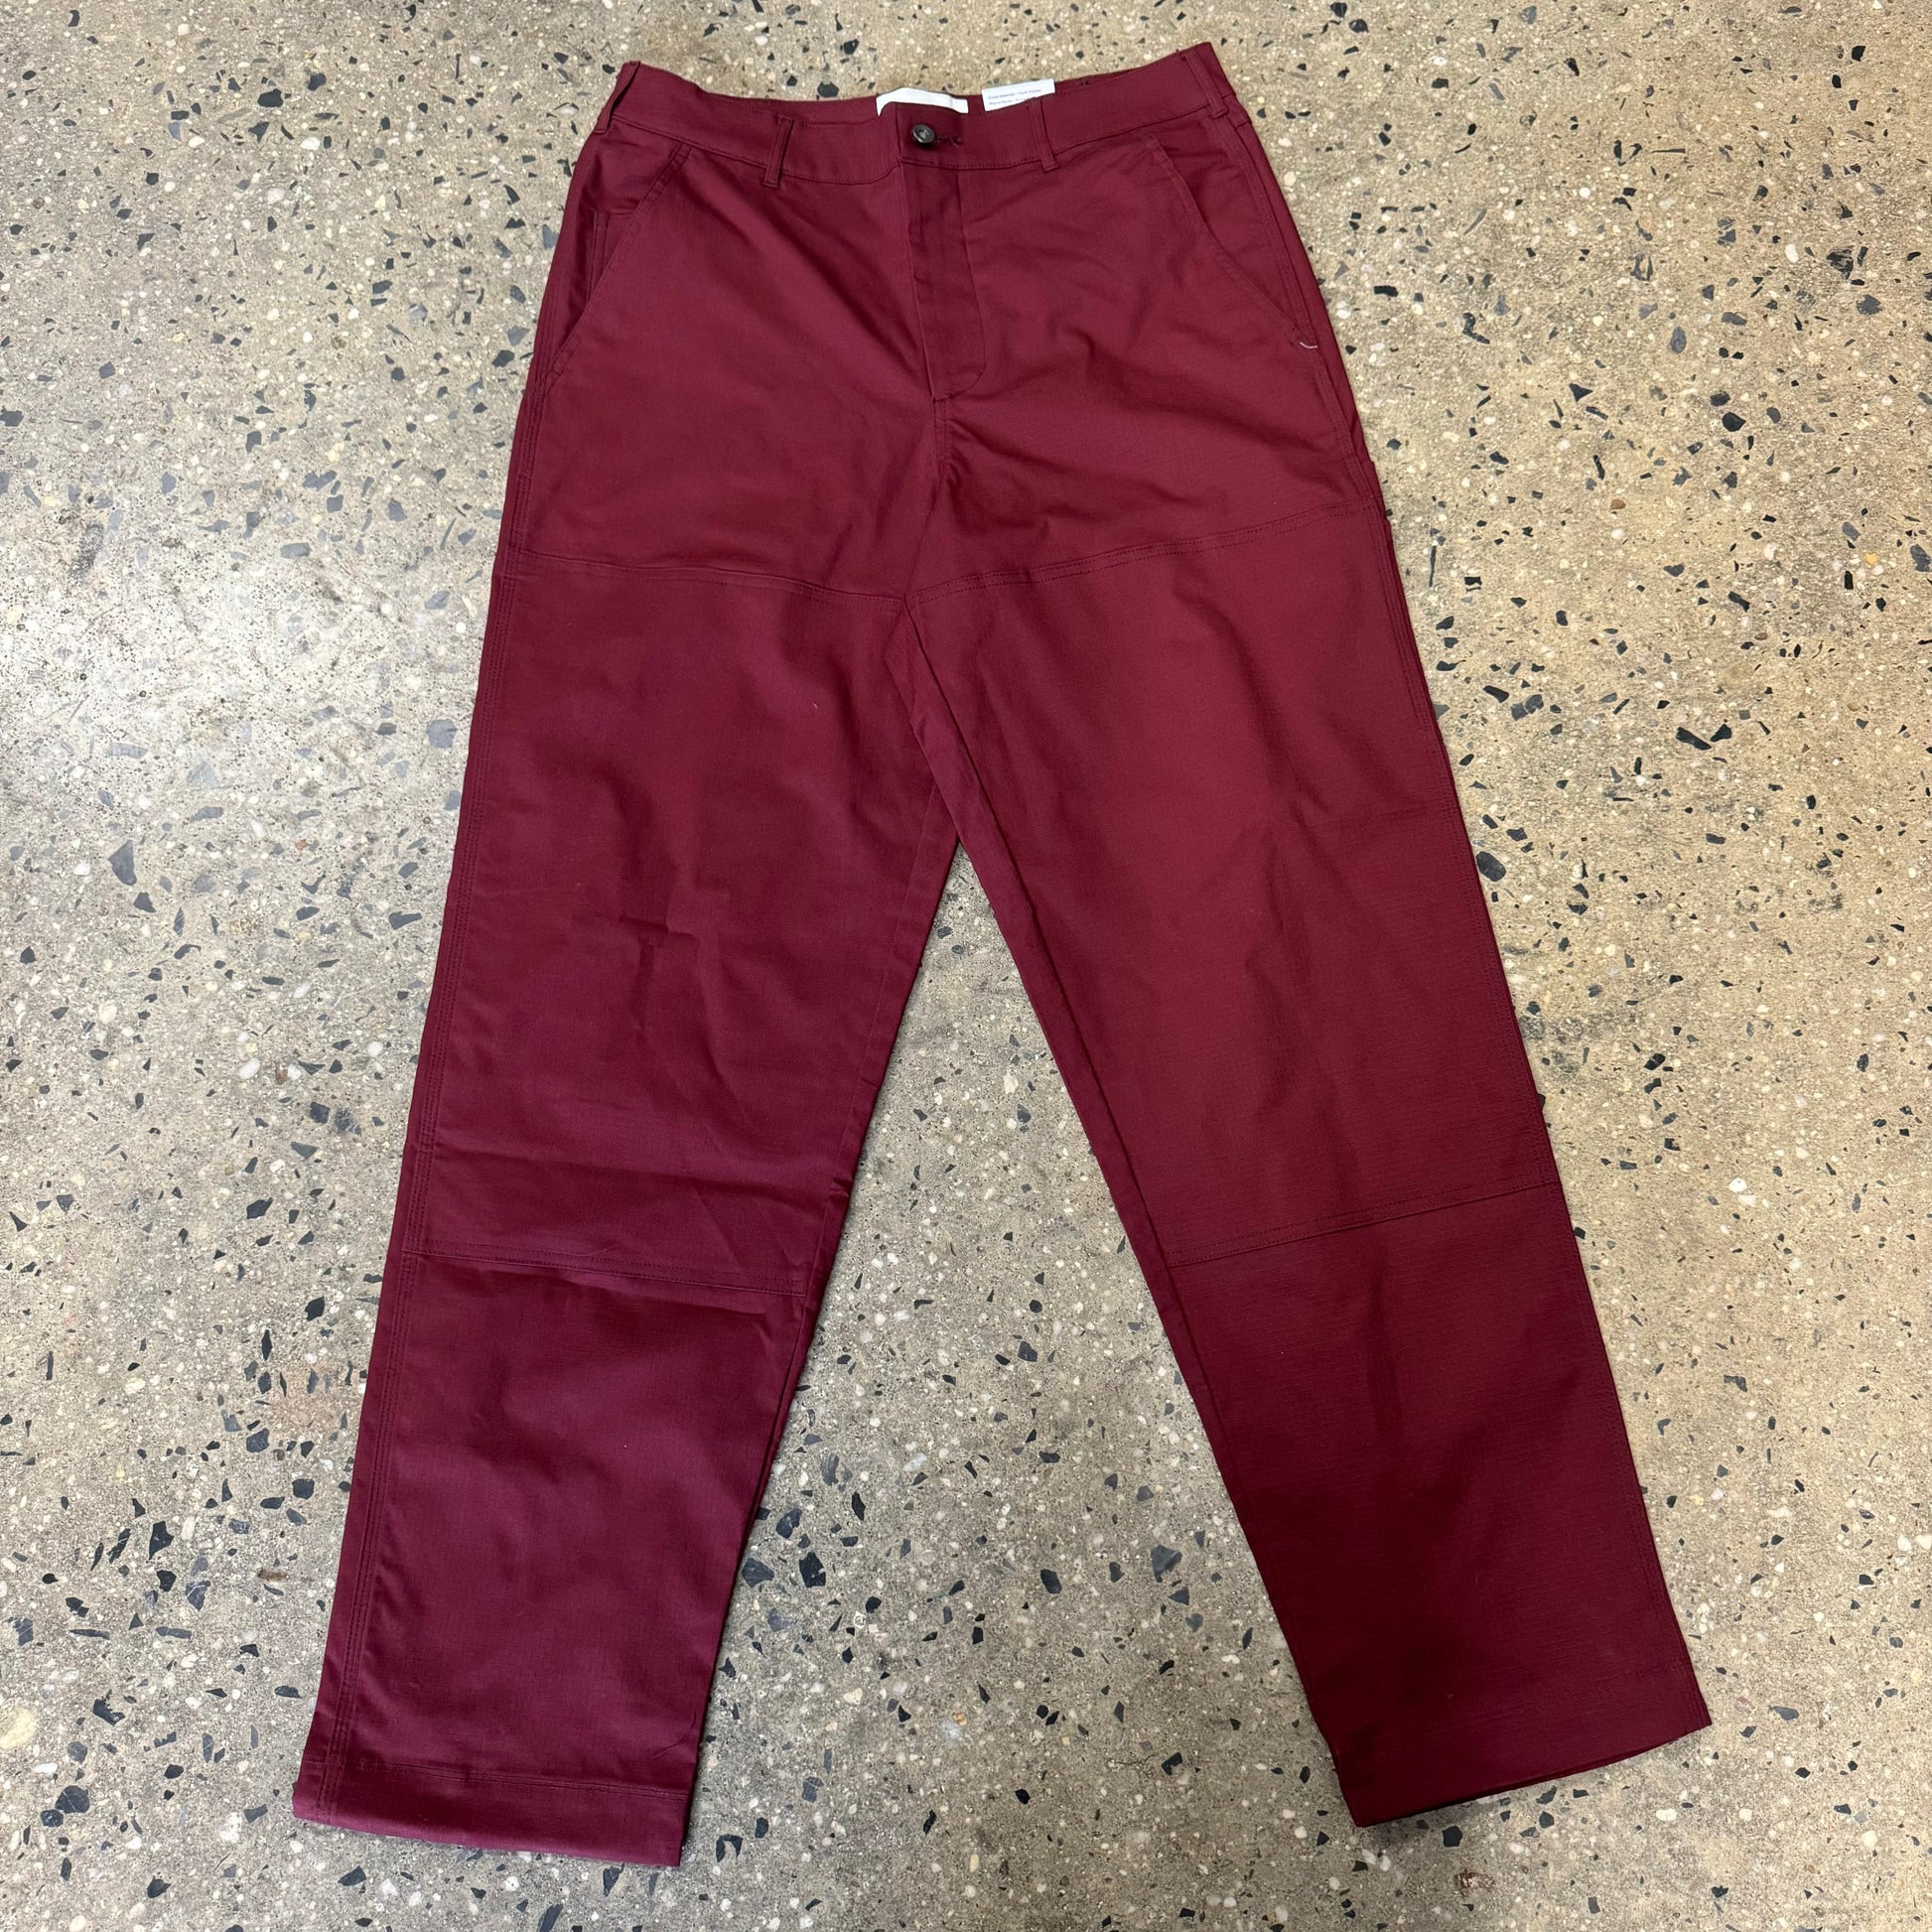 dark red pants, front view of double knee